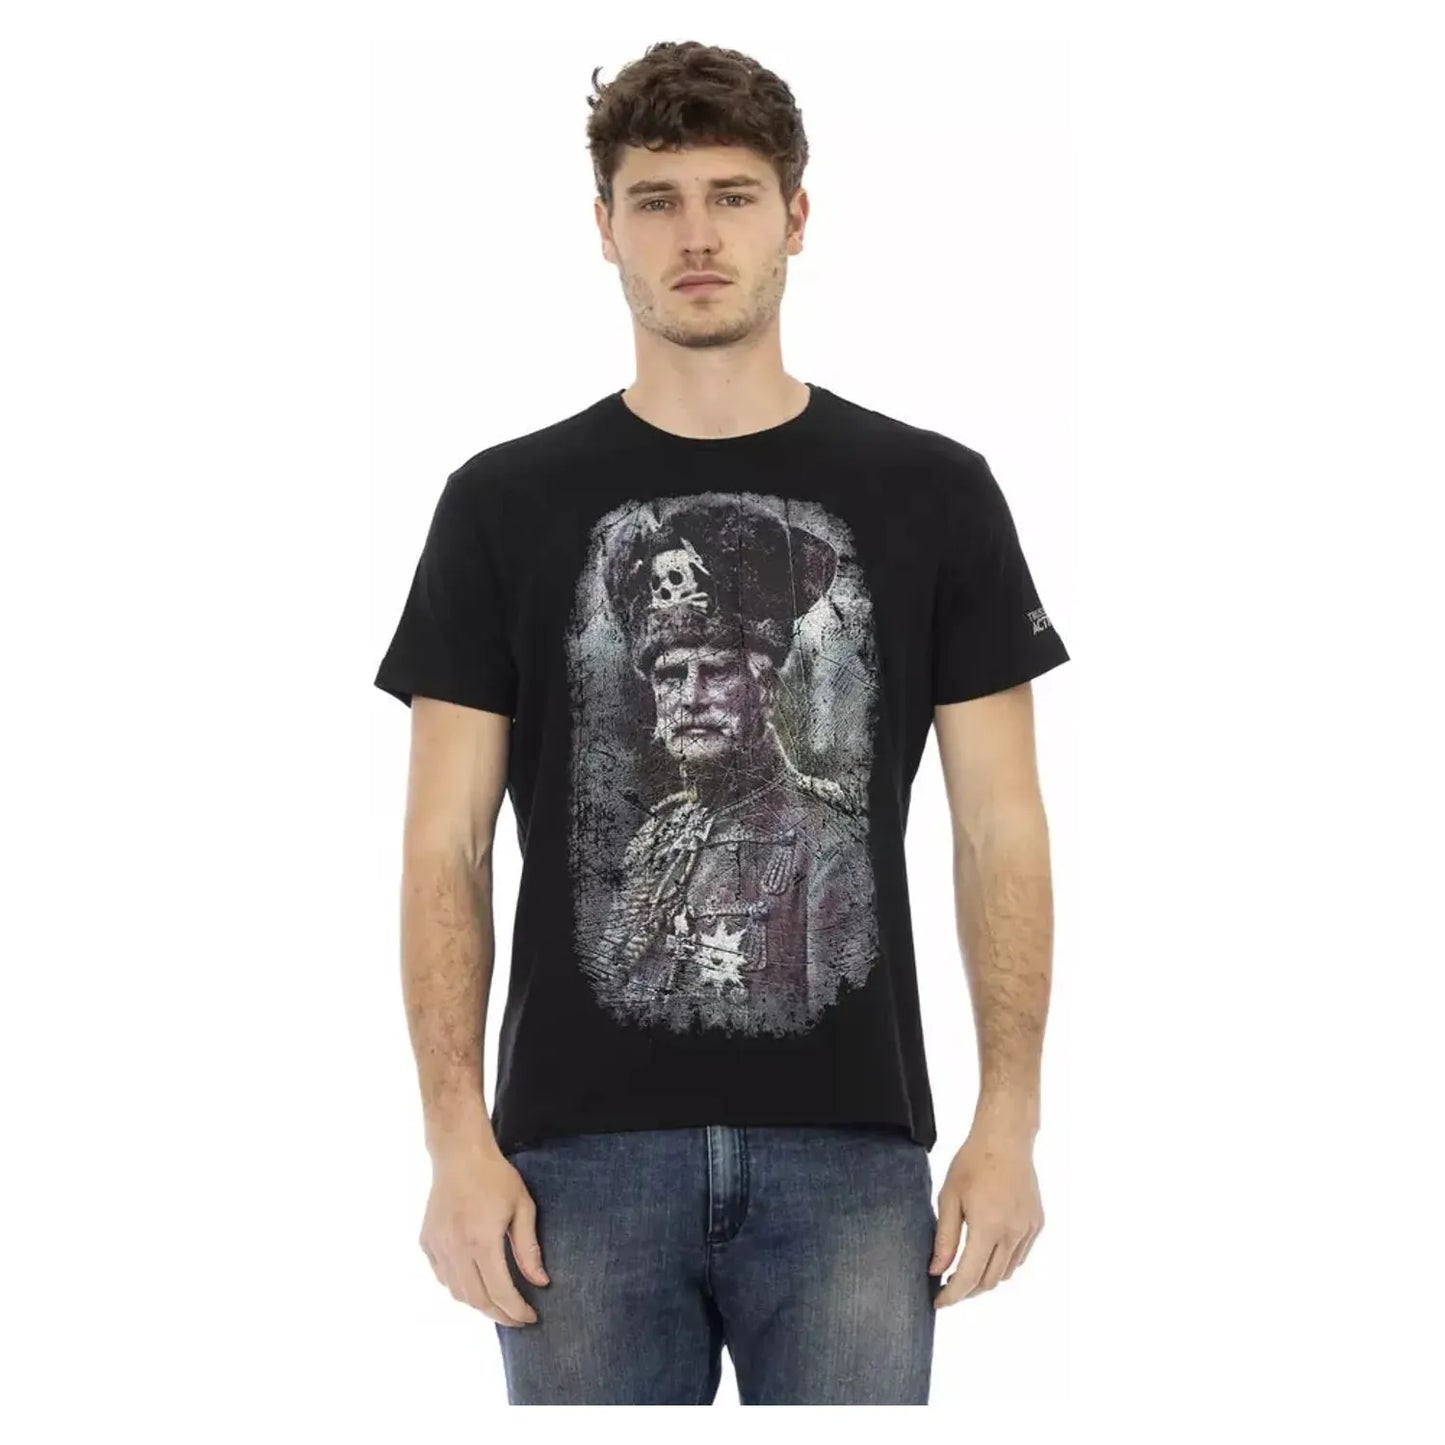 Trussardi Action Sleek Black Graphic Tee with Artistic Flair black-cotton-t-shirt-26 product-22691-1104915867-21-db3cf159-180.webp